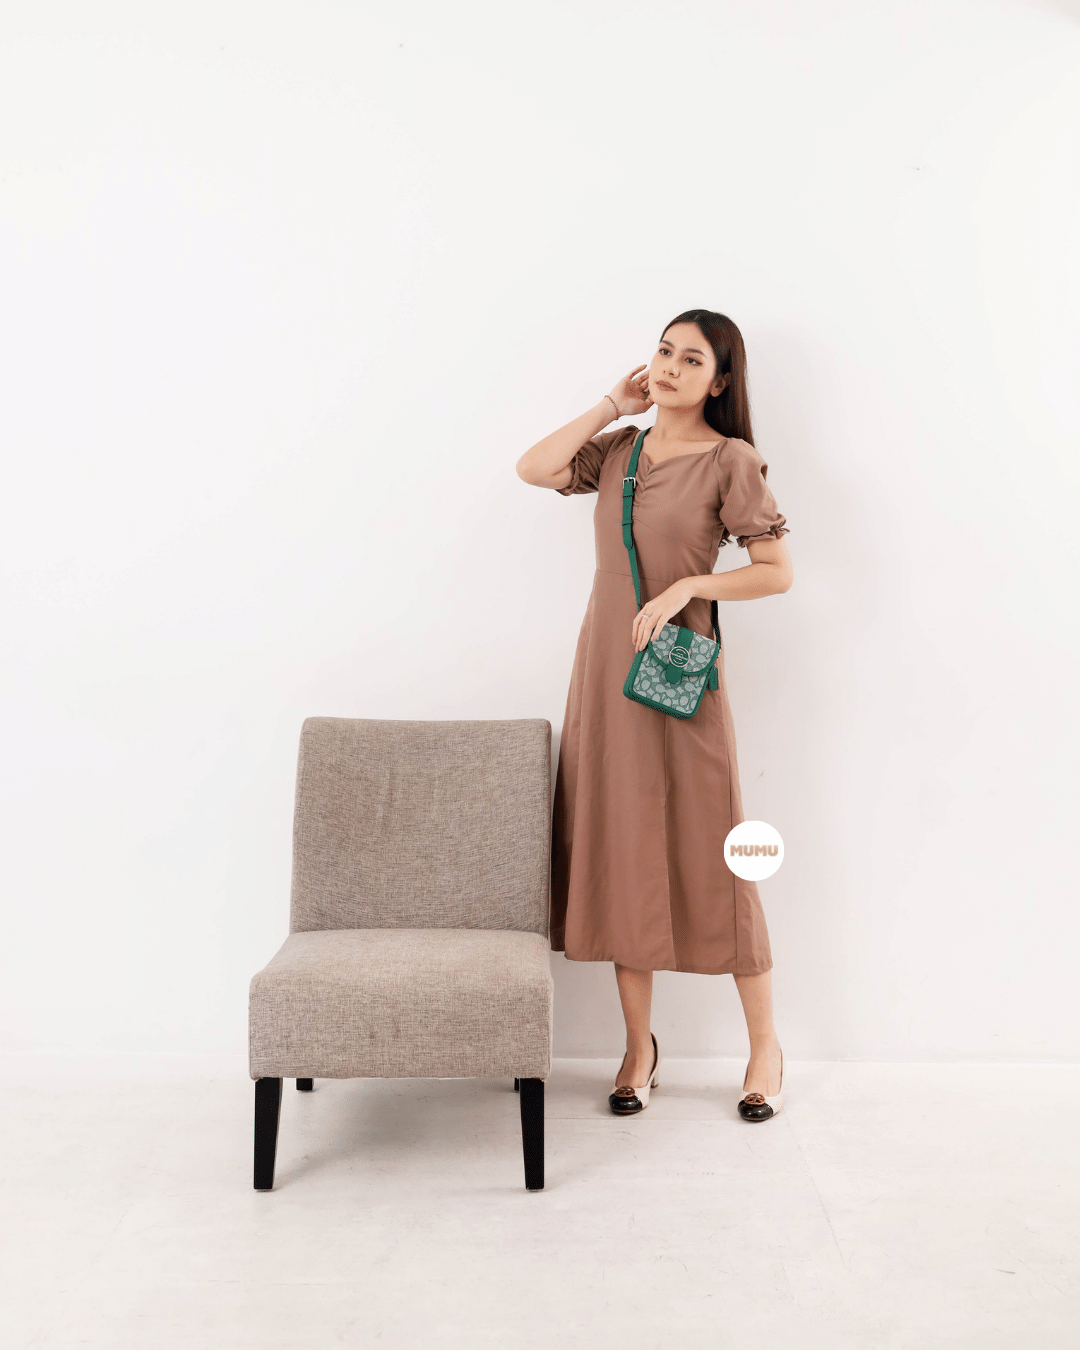 North South Lonnie Crossbody In Signature Jacquard Green